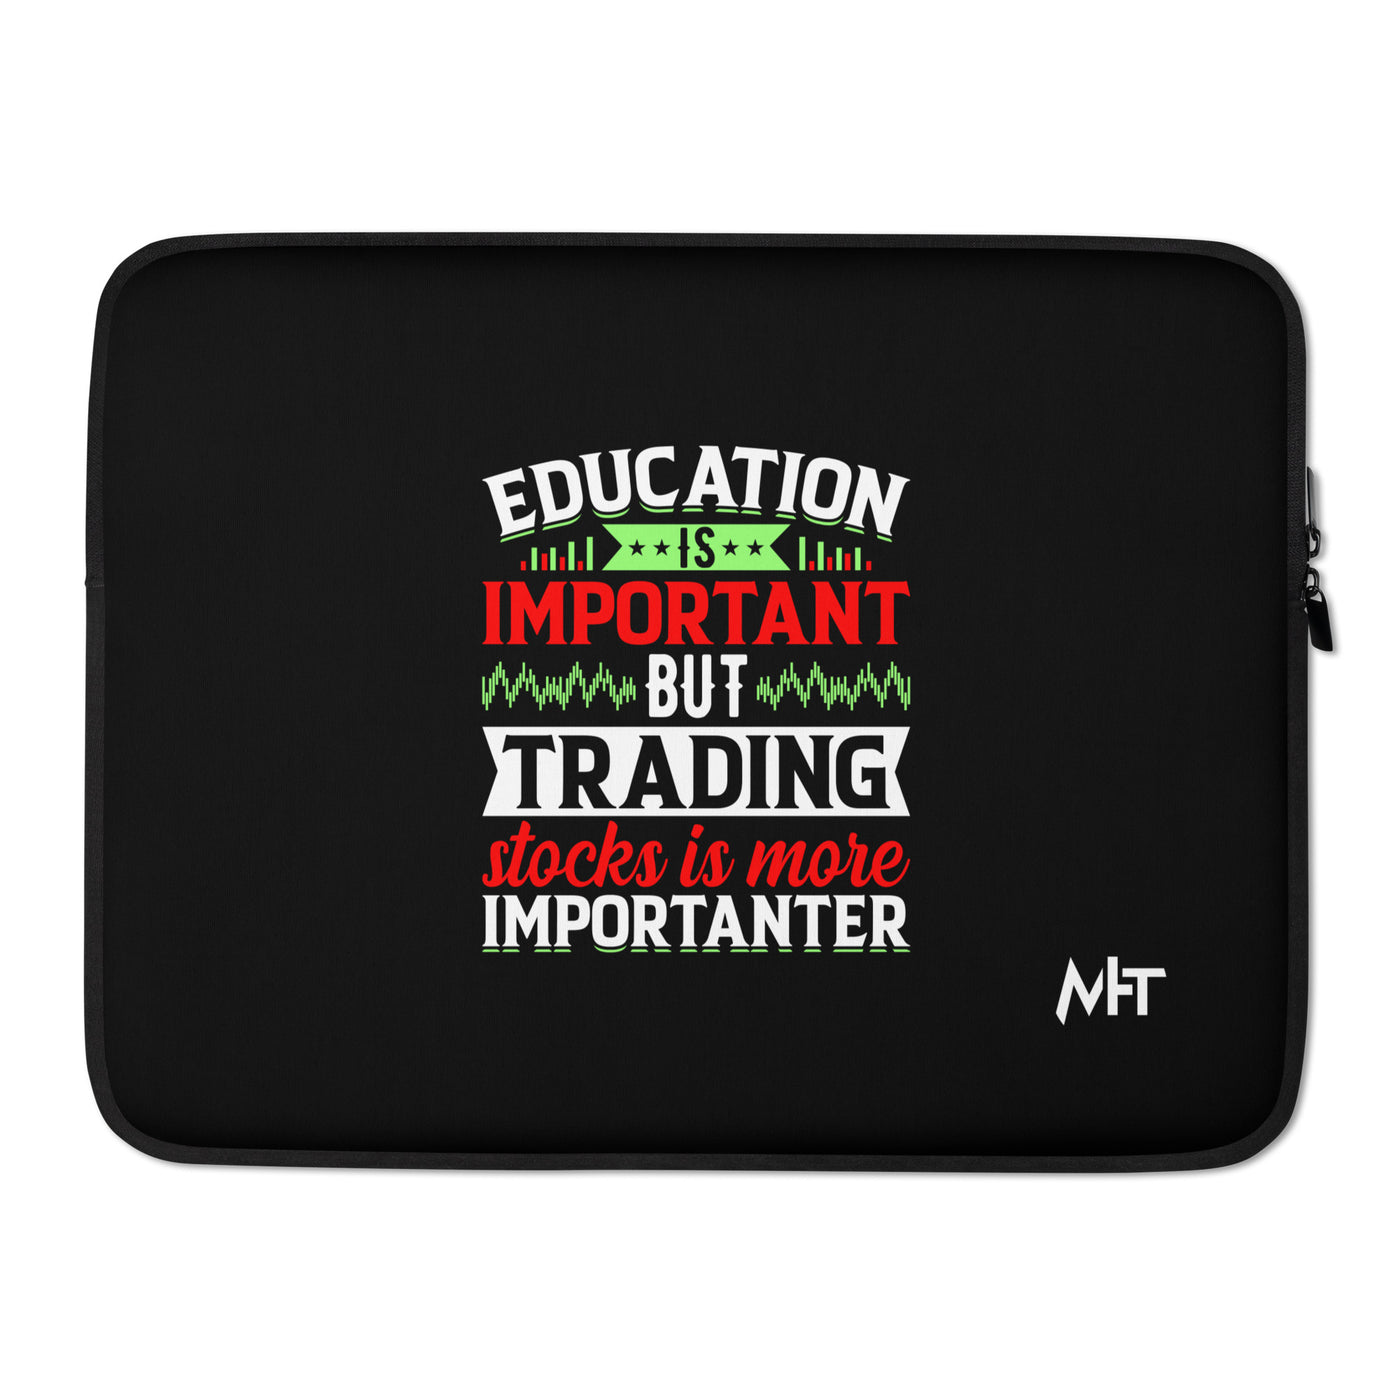 Education is important but trading stocks is more importanter - Laptop Sleeve